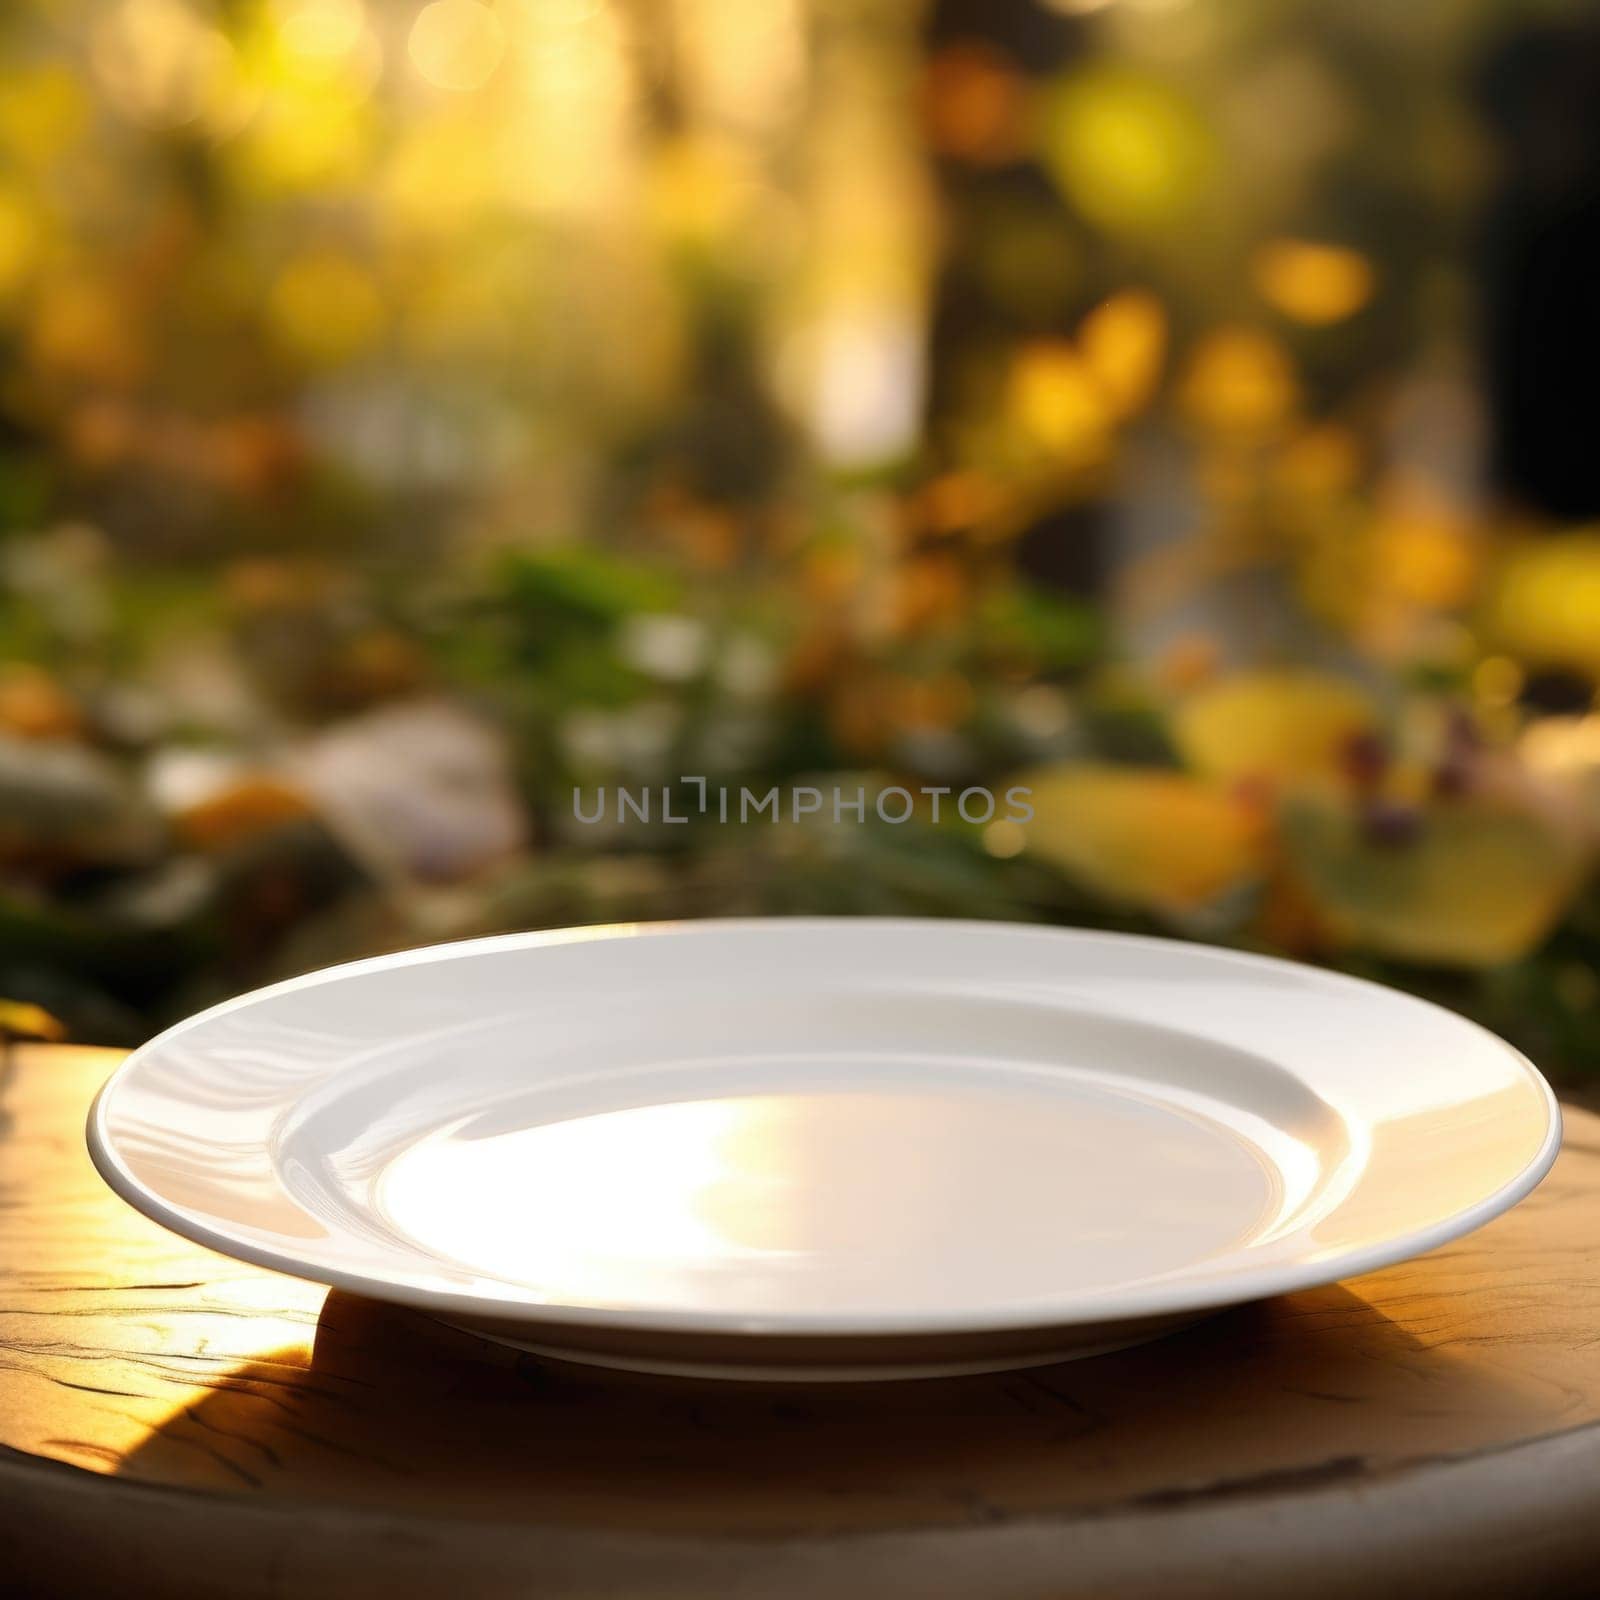 Empty white plate on wooden table with blurred background, AI by starush